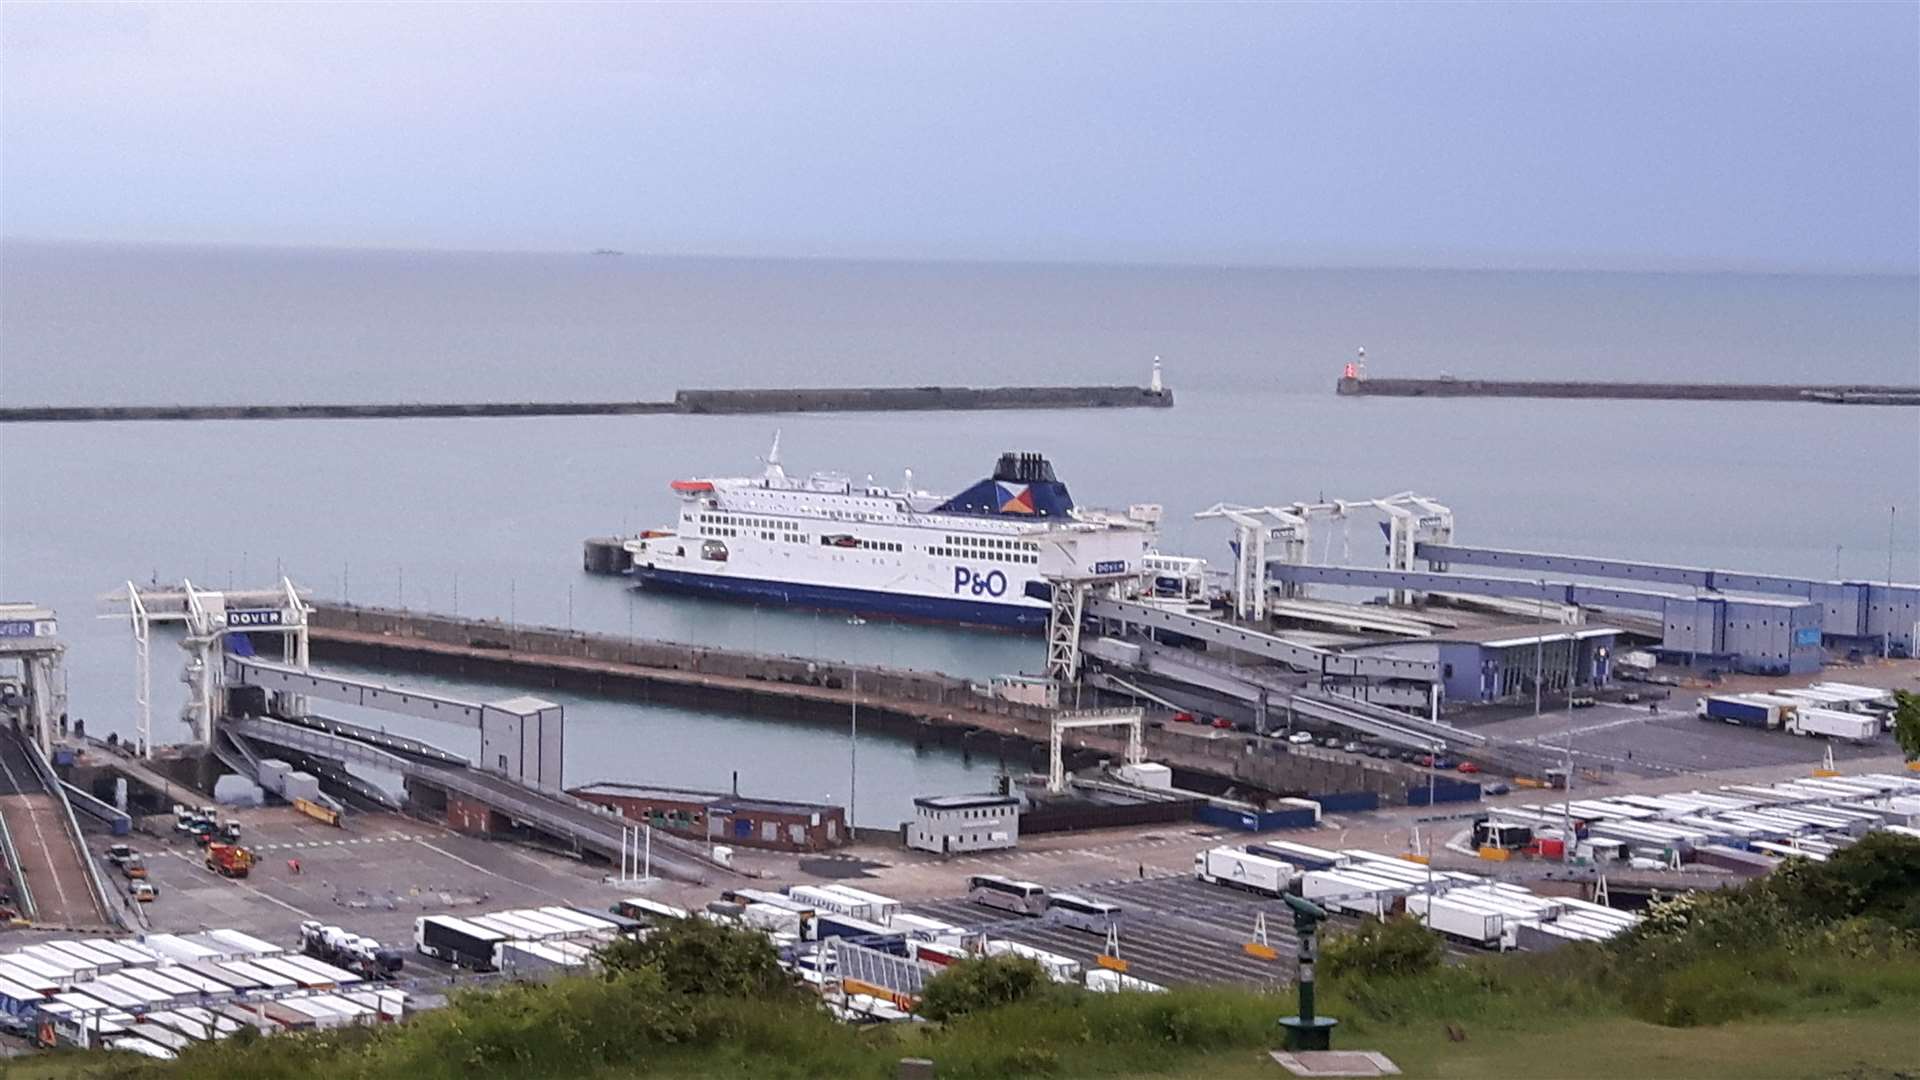 P&O ferries at Dover Eastern Docks